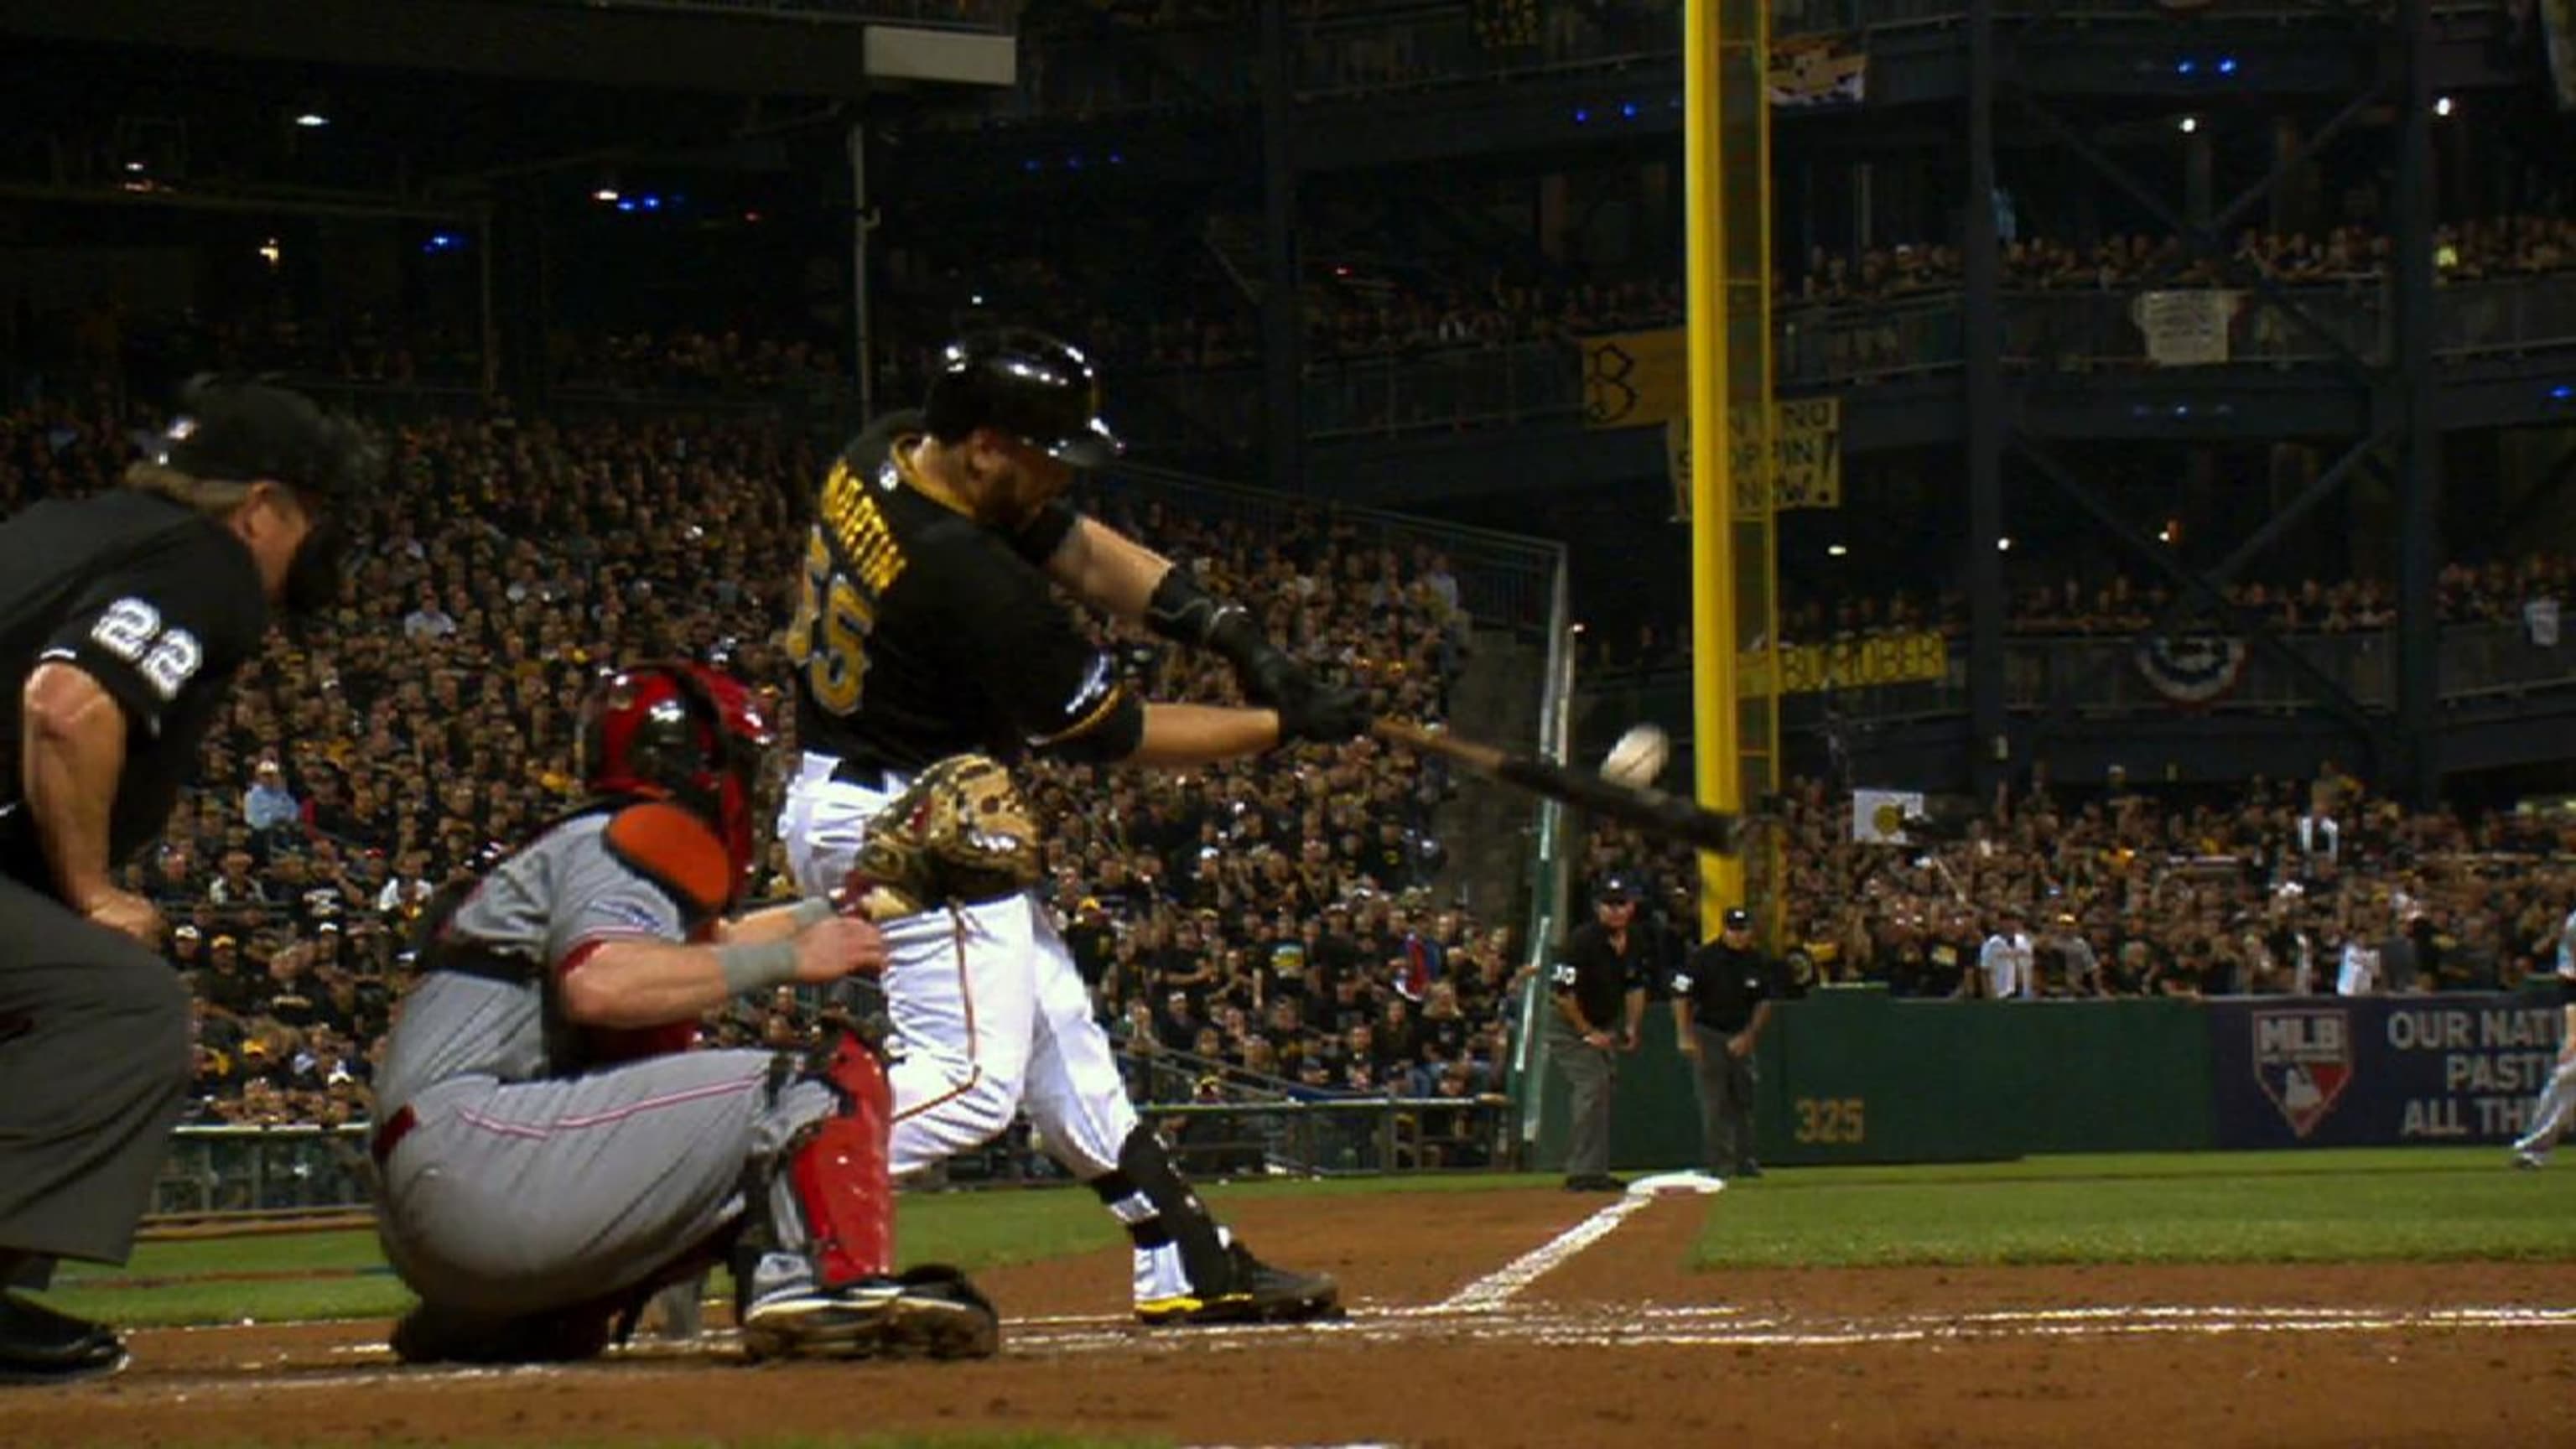 Russell Martin gives Pirates 1-0 walk-off win in 11th vs. Tigers